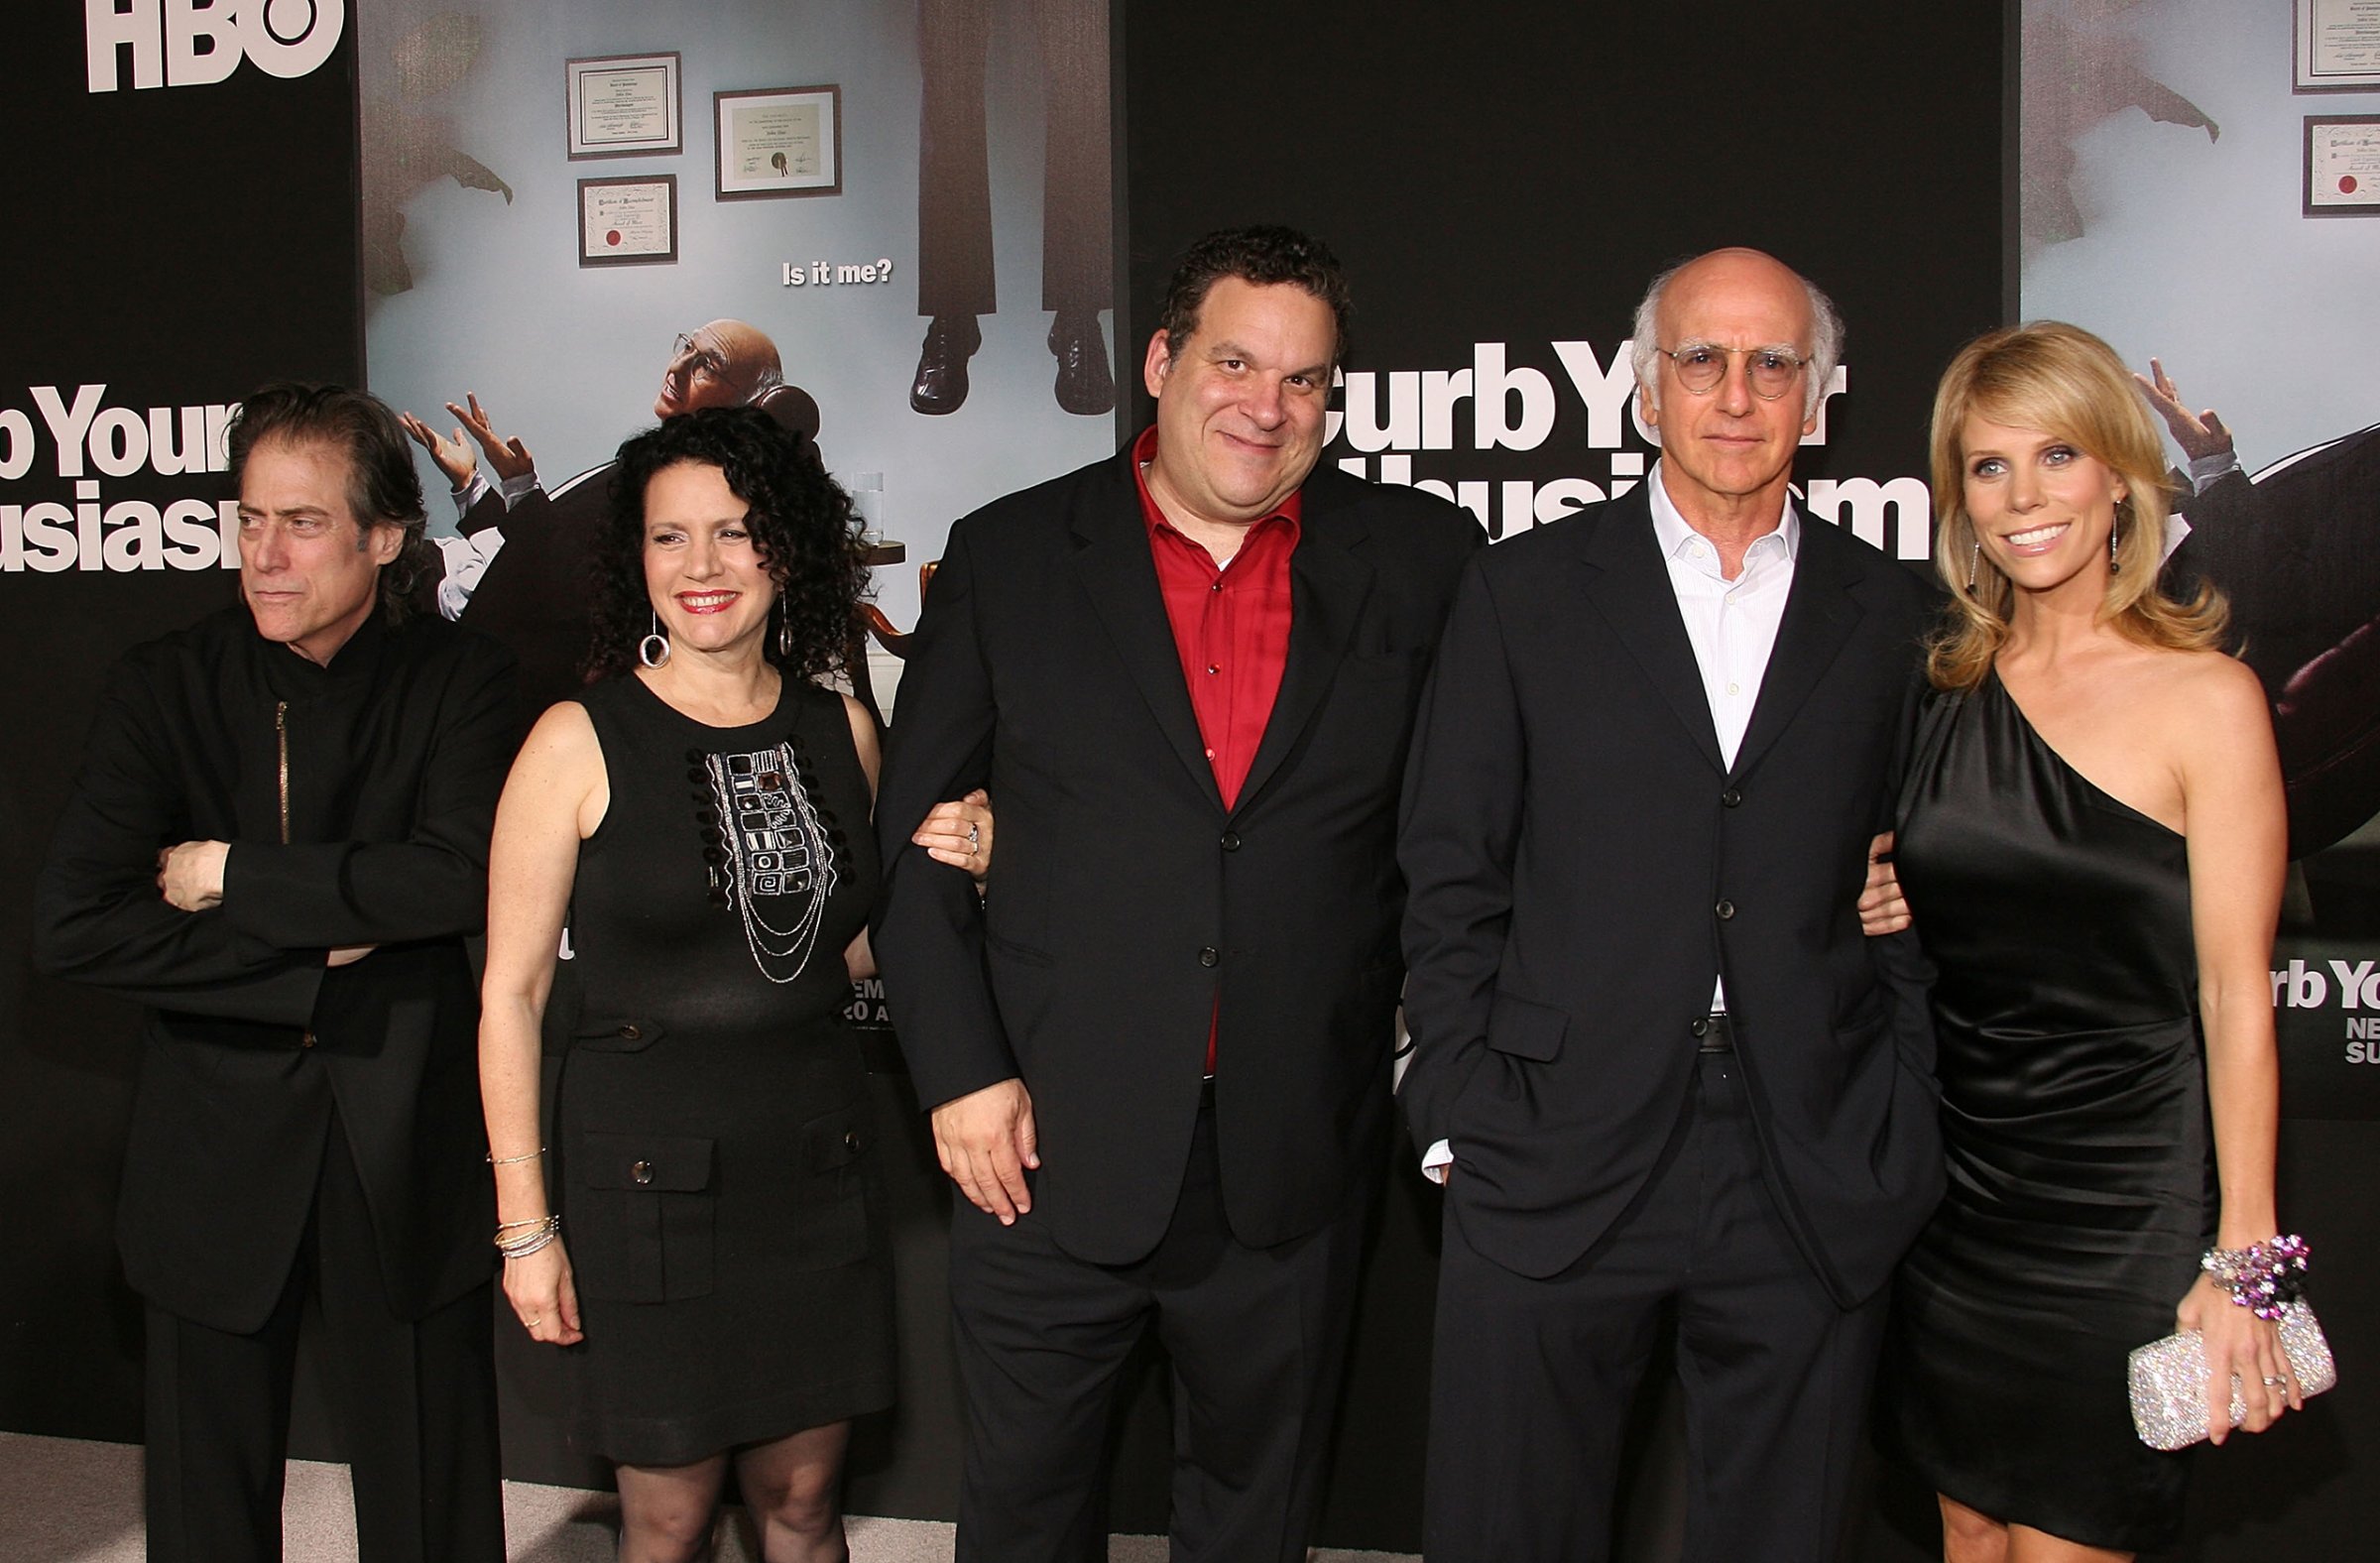 Actors (L-R) Richard Lewis, Susie Essman, Jeff Garlin, Larry David and Cheryl Hines arrive at the season 7 premiere for "Curb Your Enthusiasm" in Hollywood, Calif. on Sept. 15, 2009.